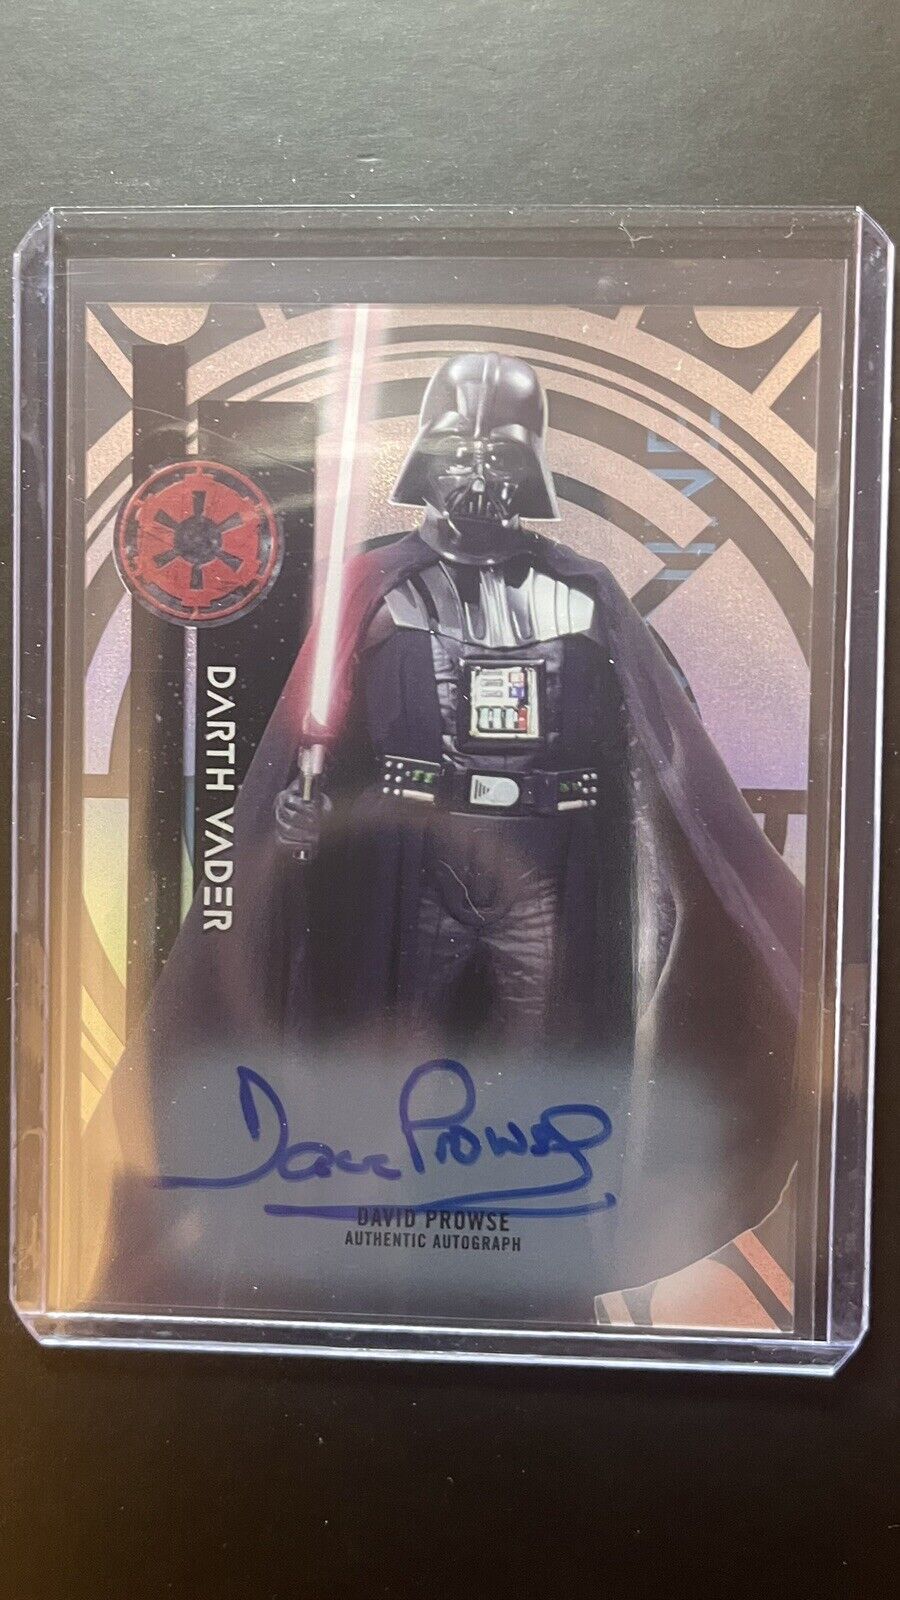 2015 Topps High Tek Star Wars DAVID PROWSE as DARTH VADER Auto on card Autograph